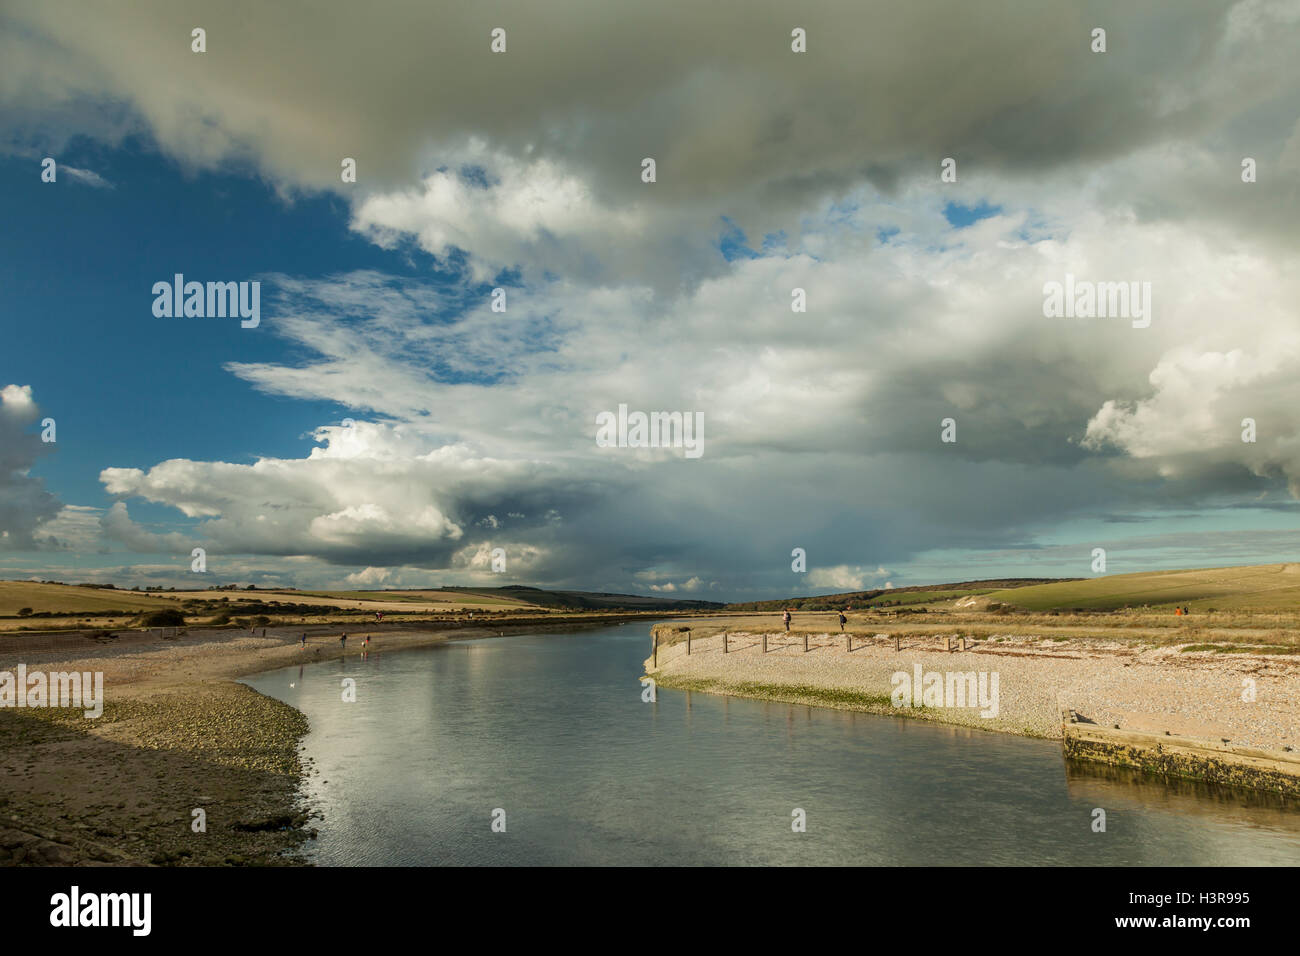 Dramatic sky over Cuckmere Haven, East Sussex, England. Stock Photo